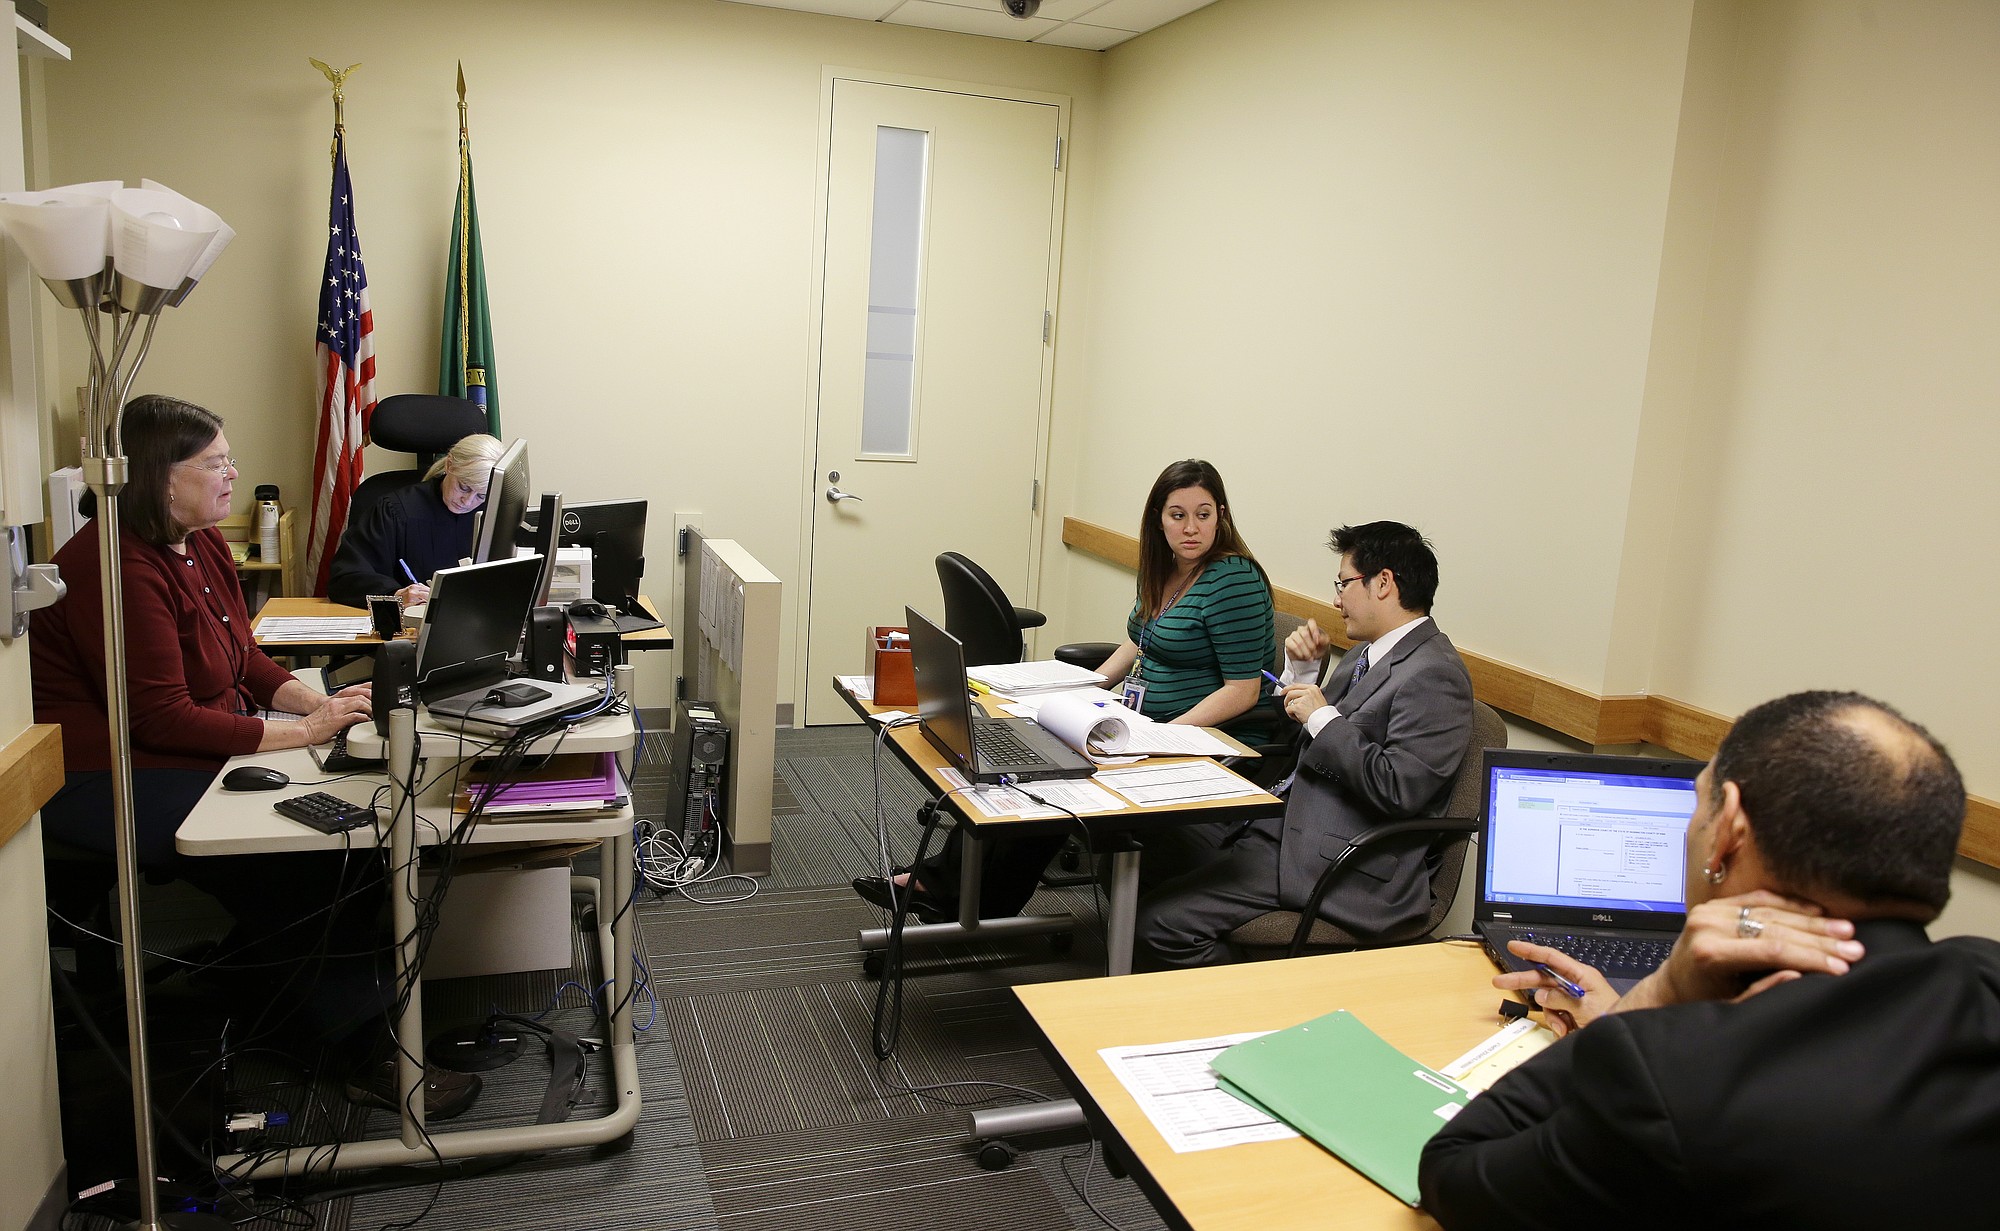 Court commissioner Hollis Holman, second from left, presides over a civil commitment court hearing held in a cramped former waiting room that has been turned into a second courtroom at Harborview Medical Center in Seattle.